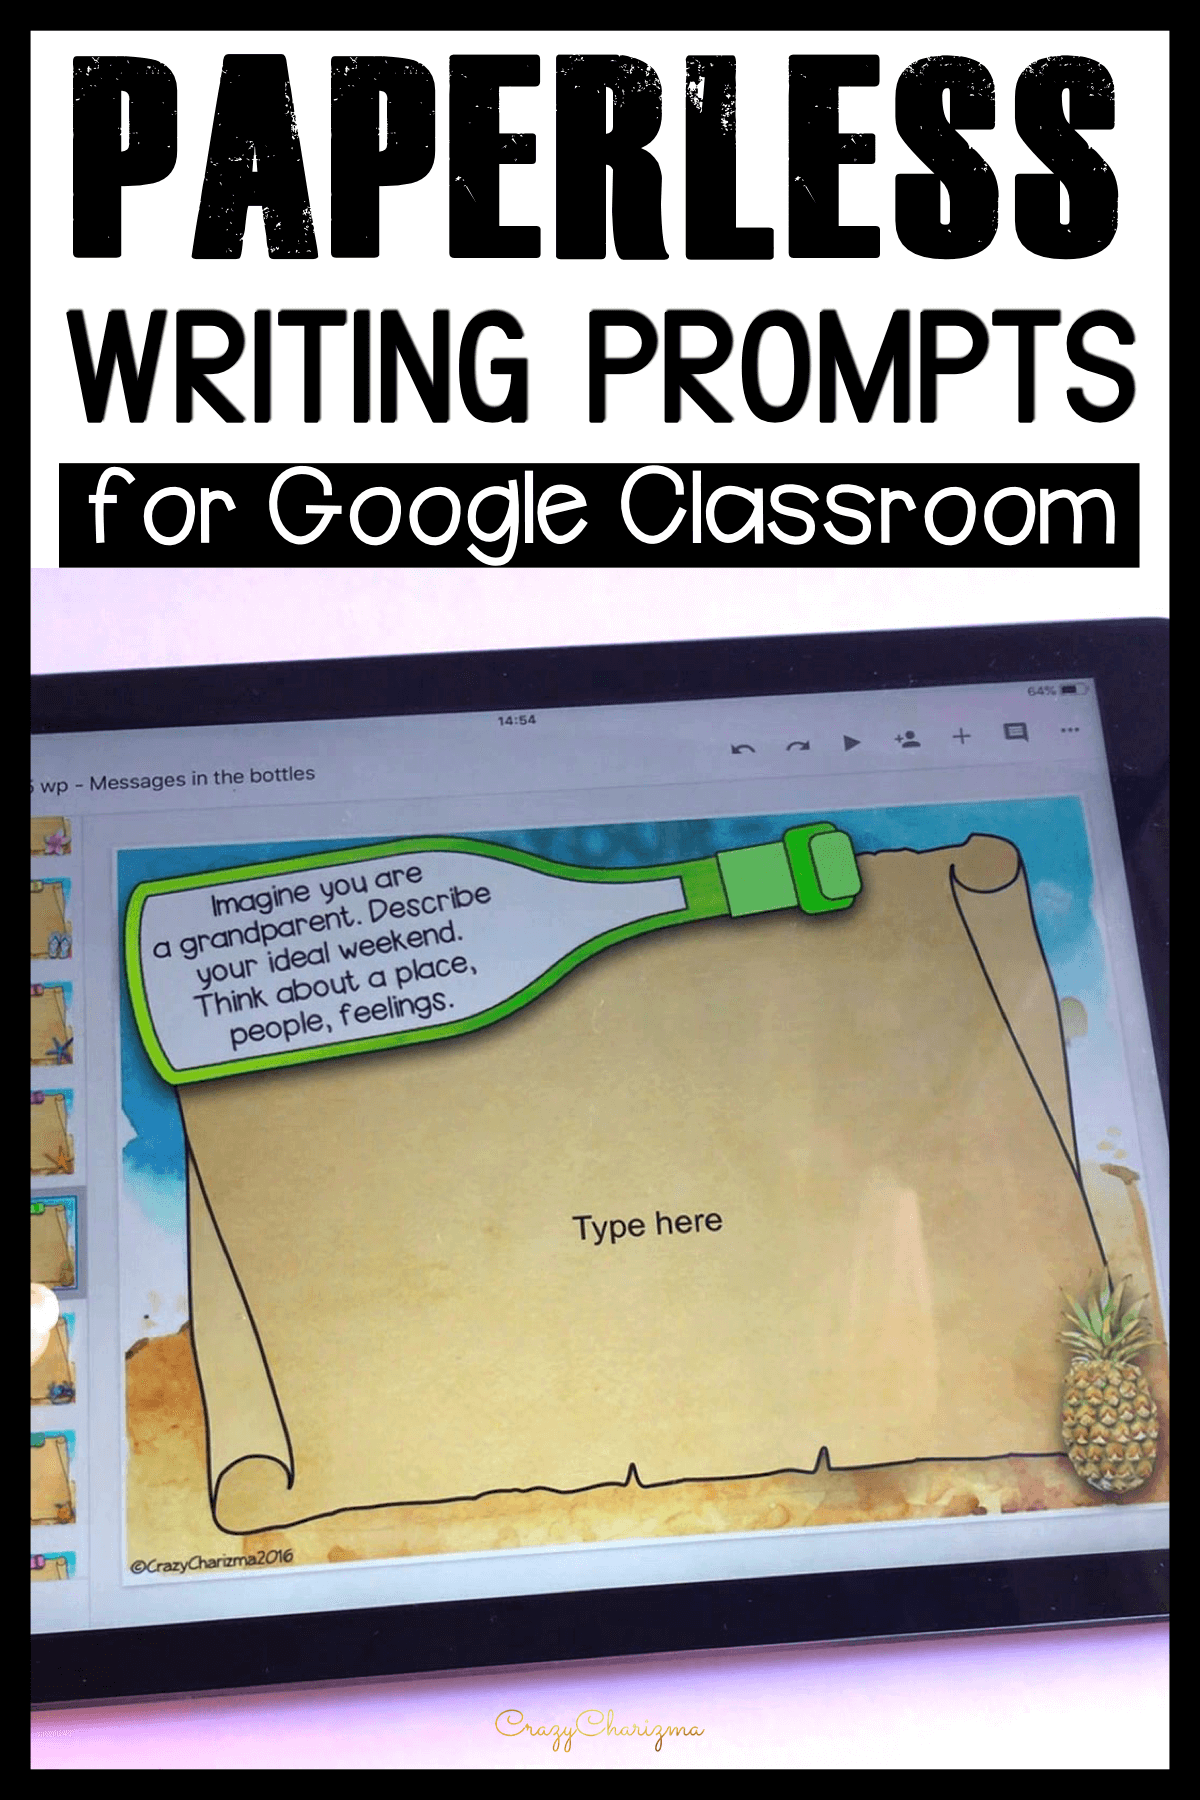 Need digital resources for quick student writing activities? Assign these prompts easily in Google Classroom, and let the students start writing right away! Monitor their progress, answer questions and offer feedback as they write!